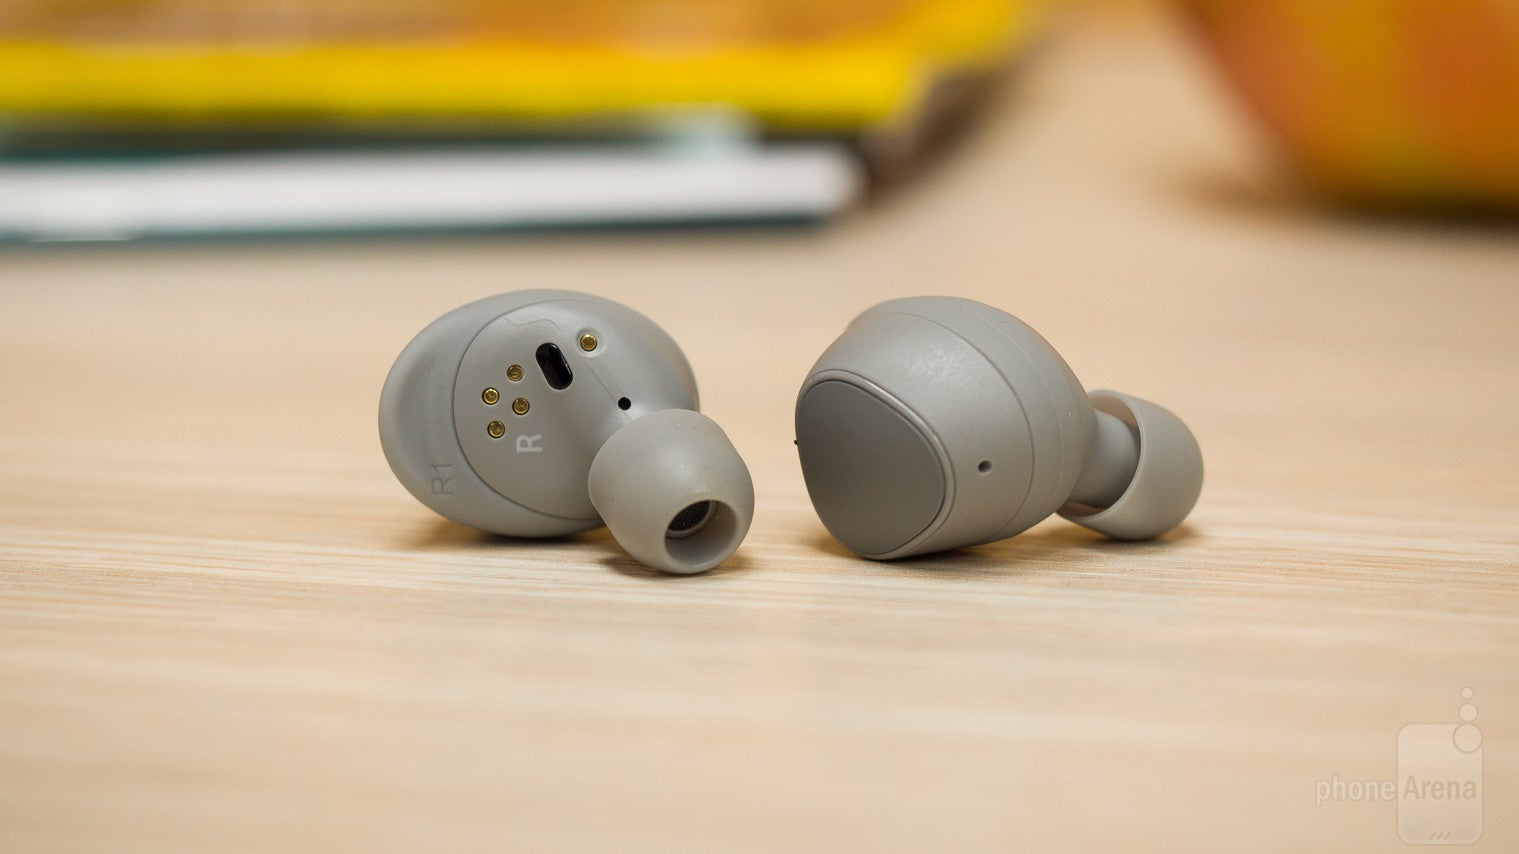 Samsung Gear IconX 2018 headphones Review